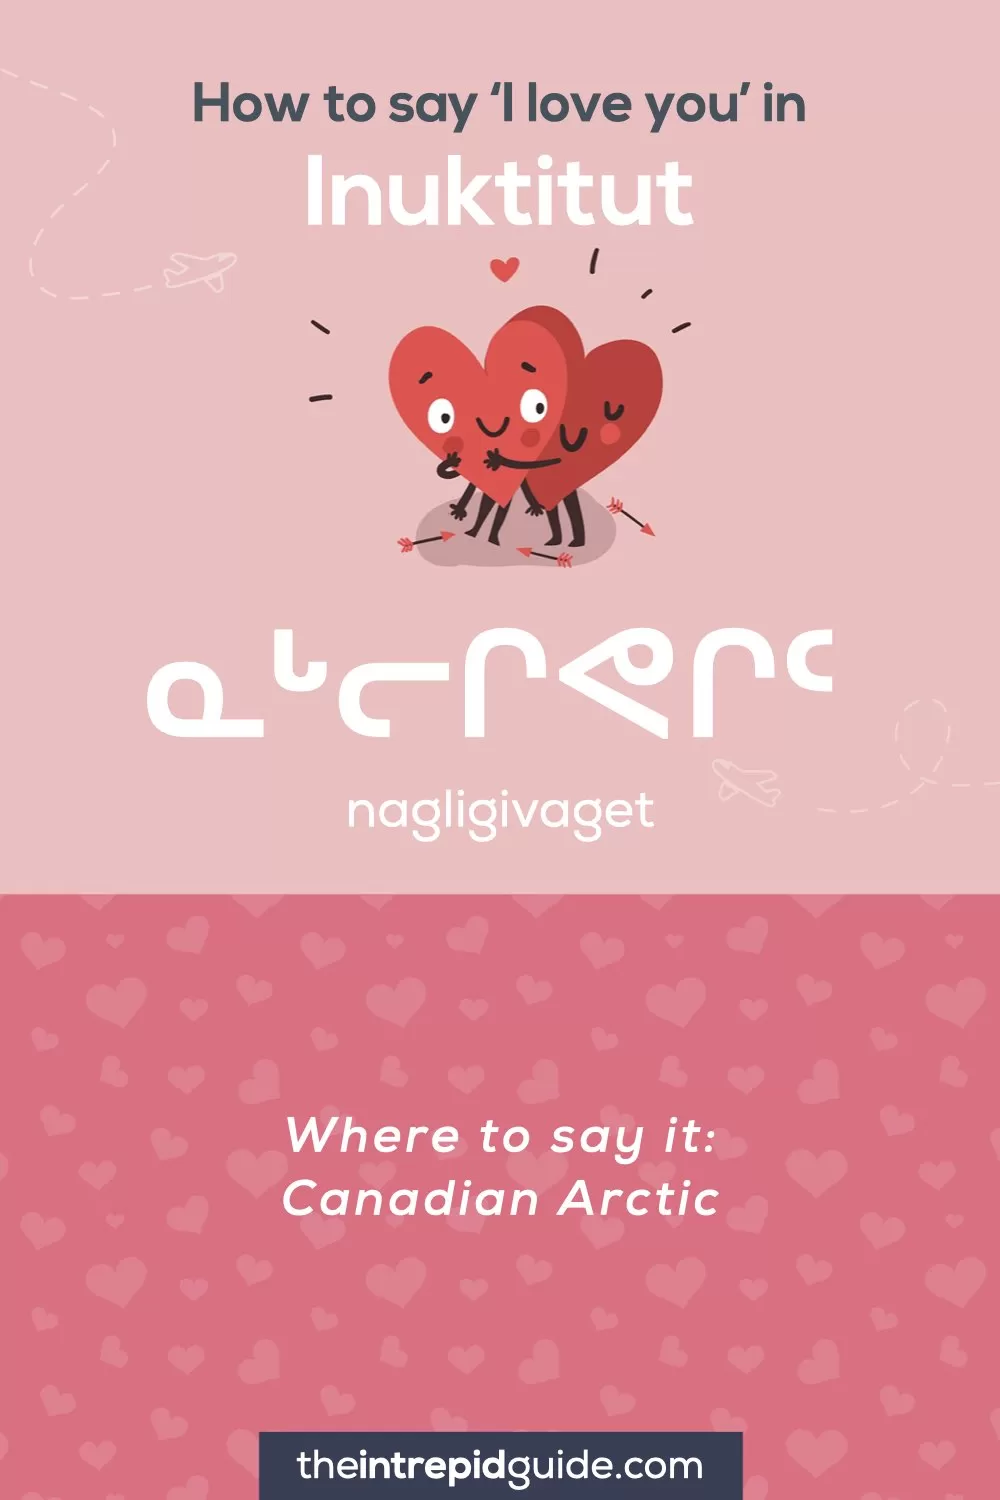 How to say I love you in different languages - Inuktitut - ᓇᒡᓕᒋᕙᒋᑦ